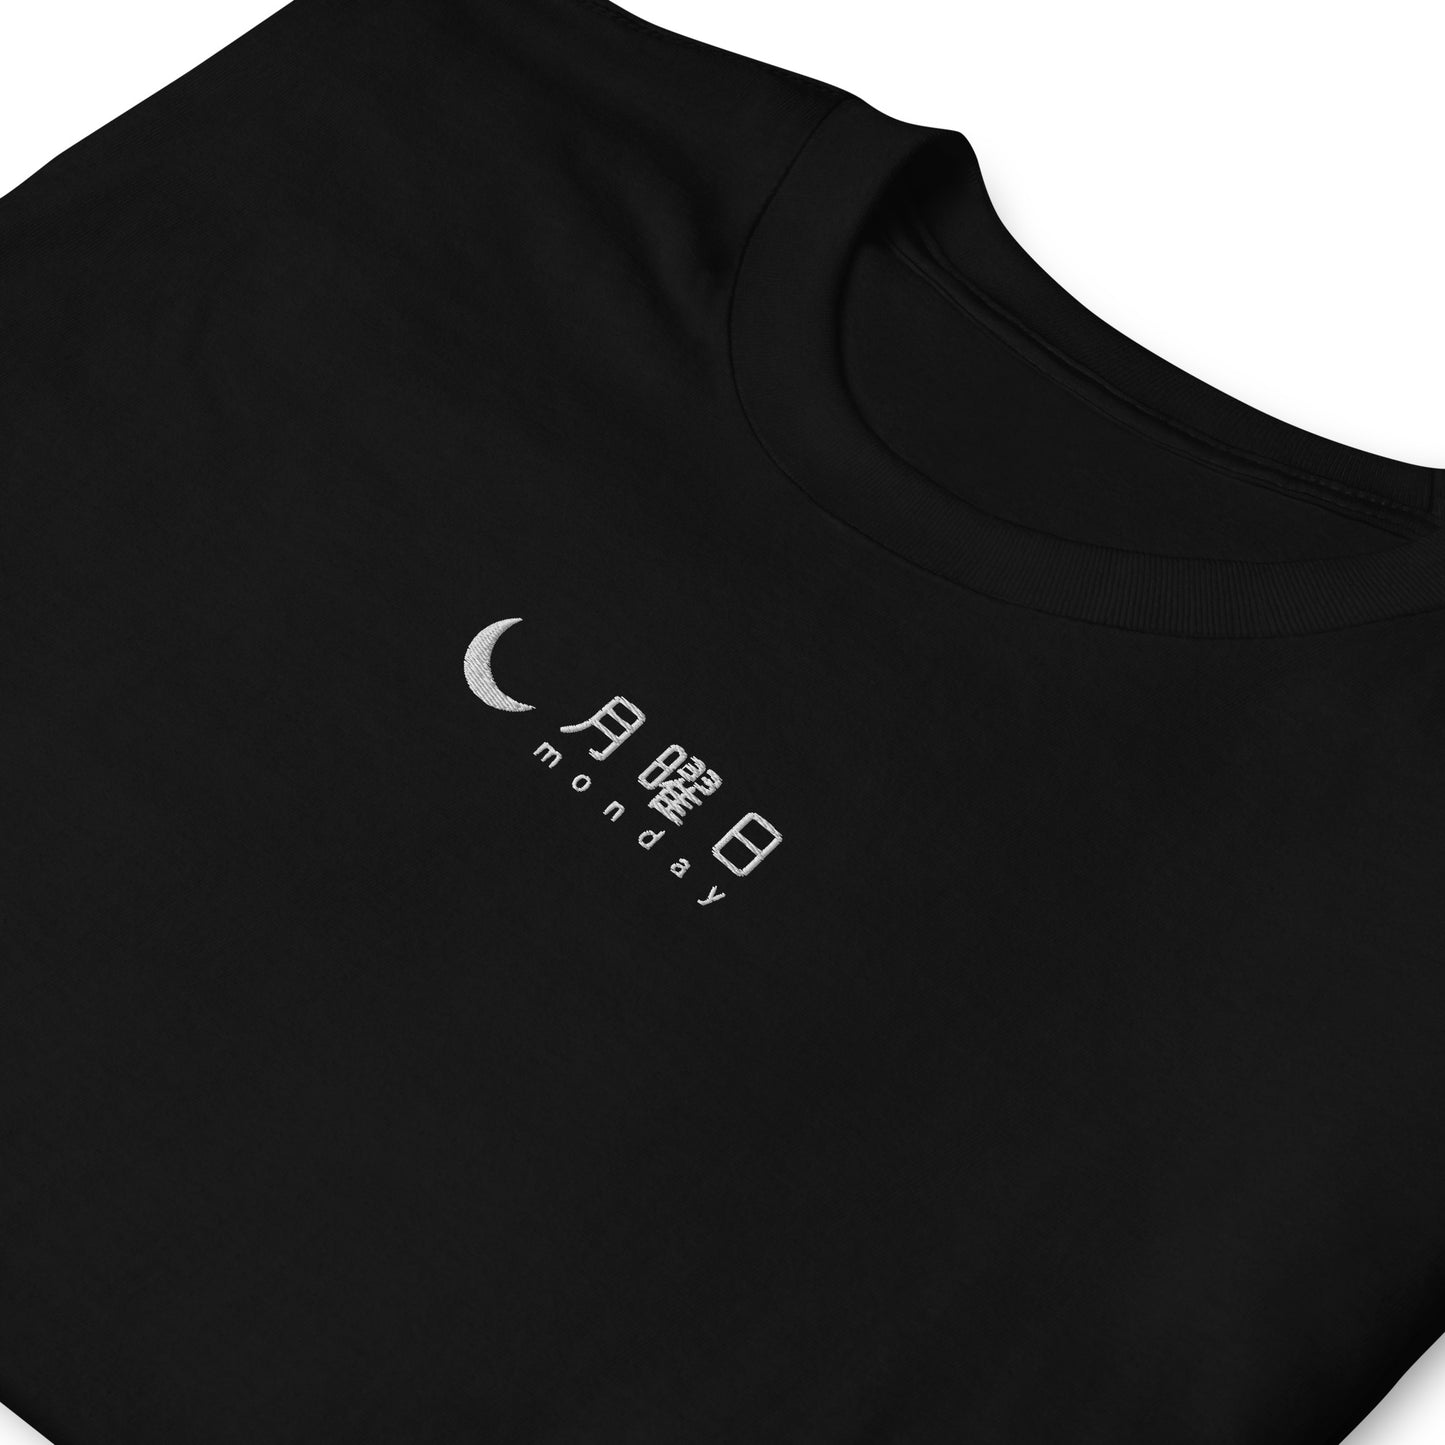 Black High Quality Tee - Front Design with an Black "Monday" in Japanese and English